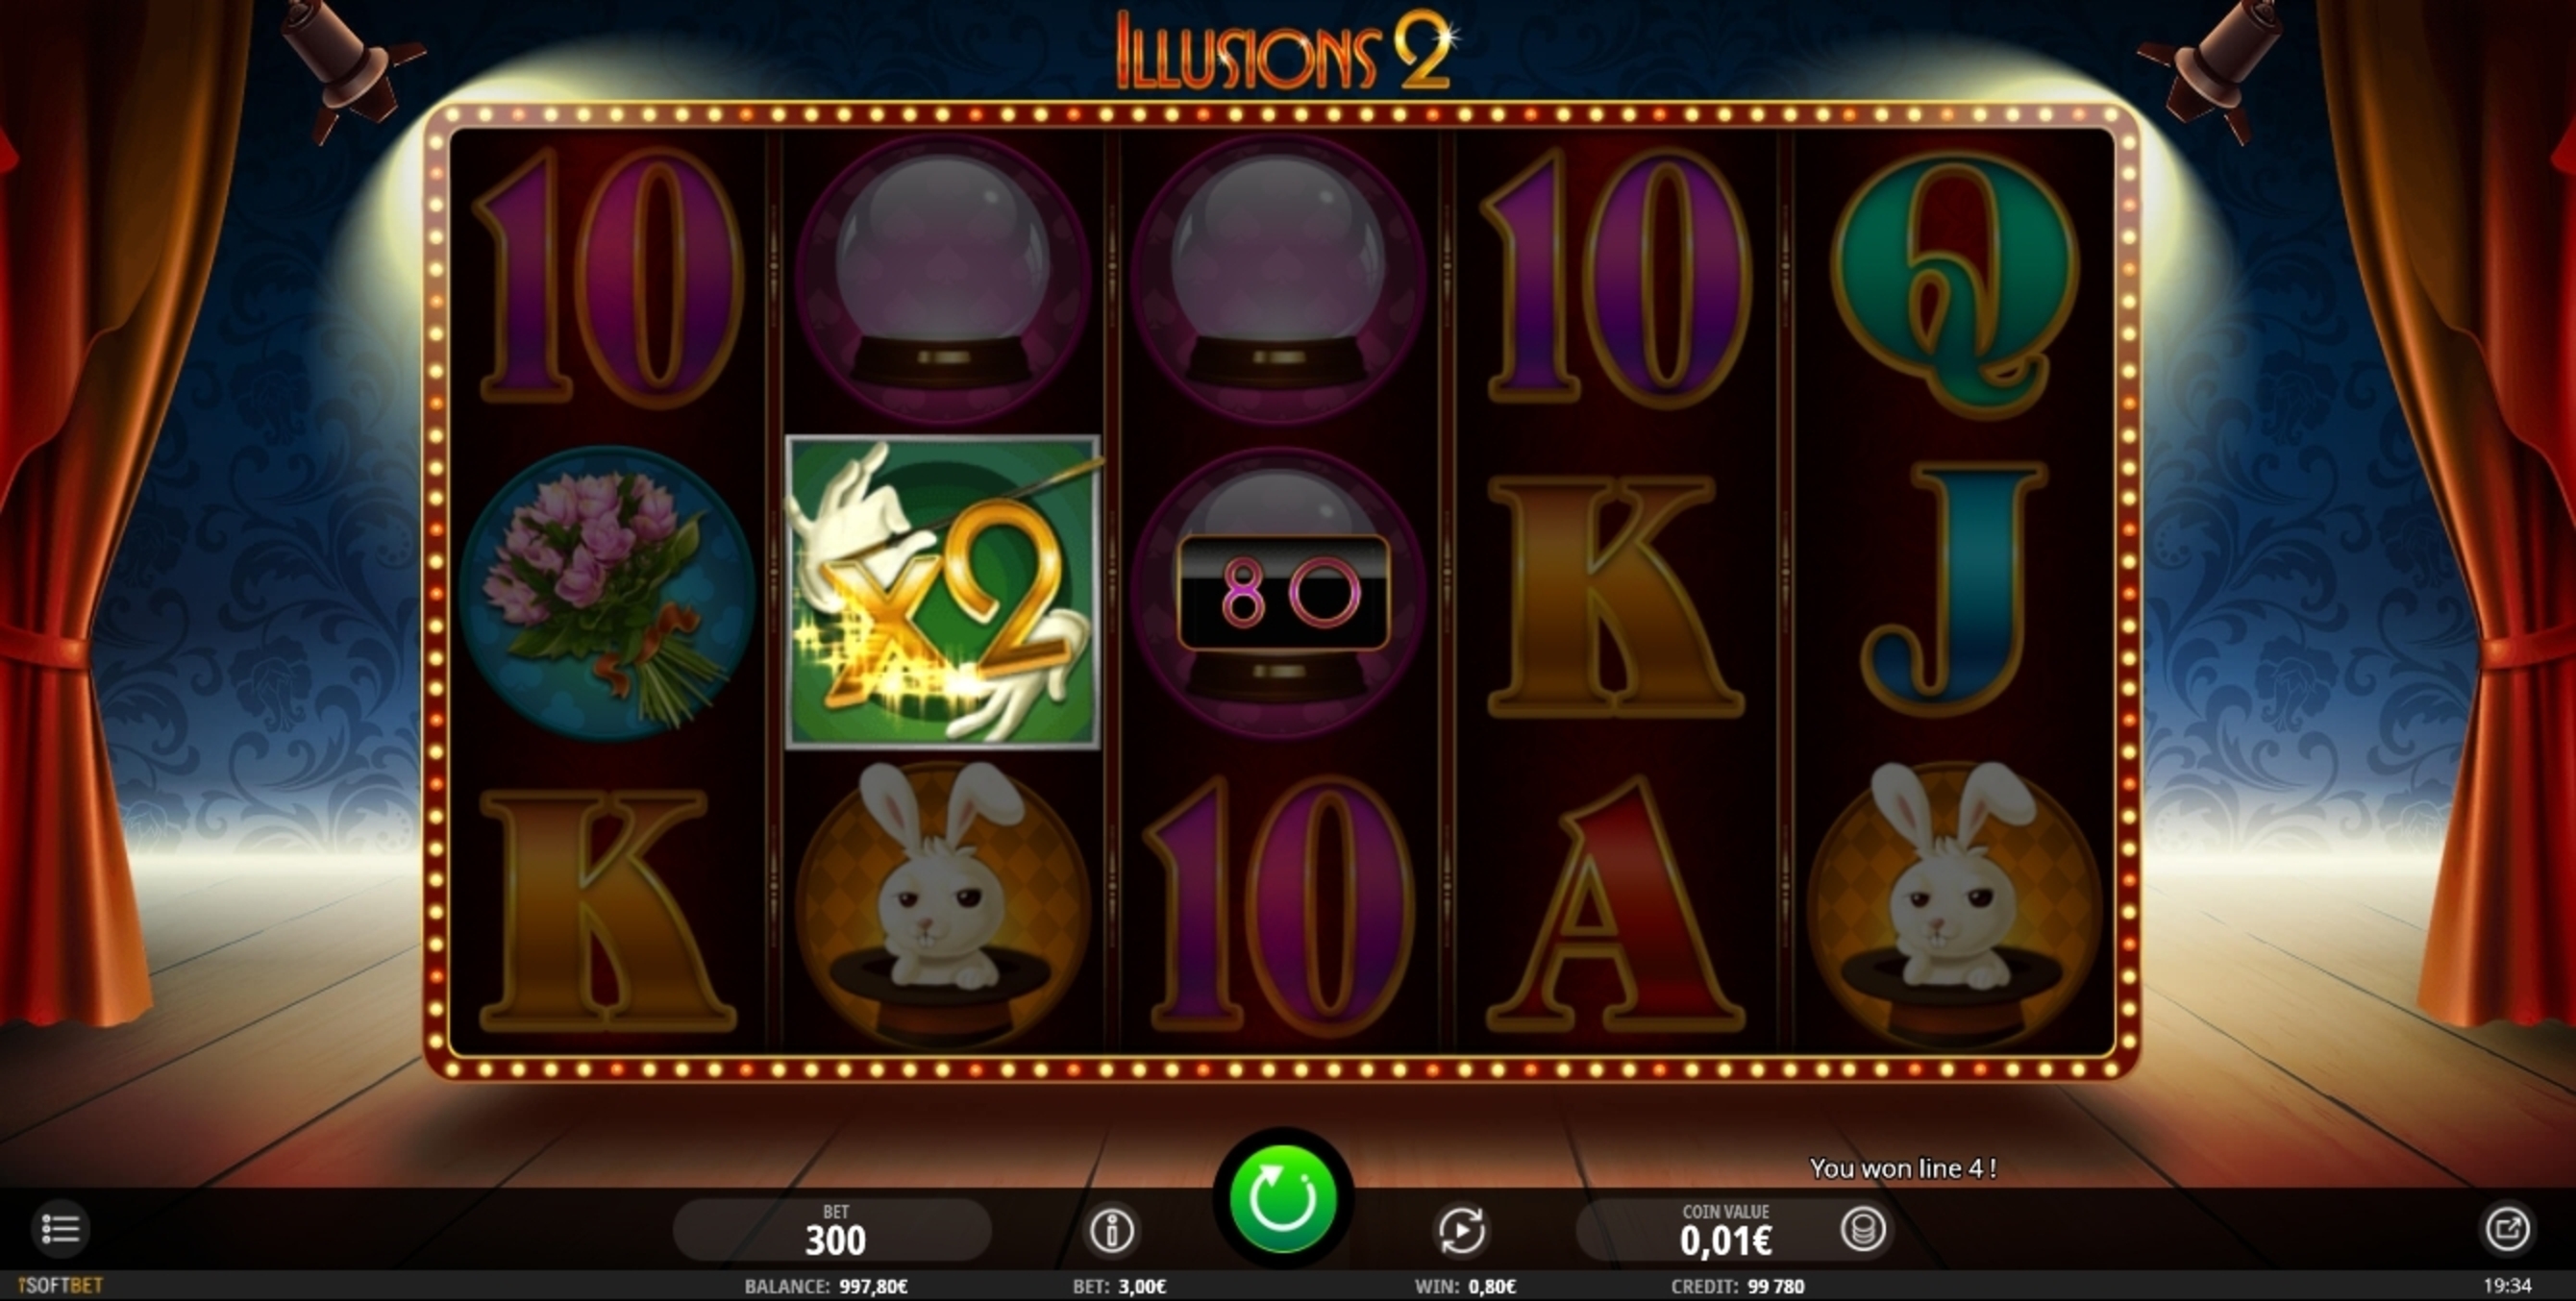 Win Money in Illusions 2 Free Slot Game by iSoftBet